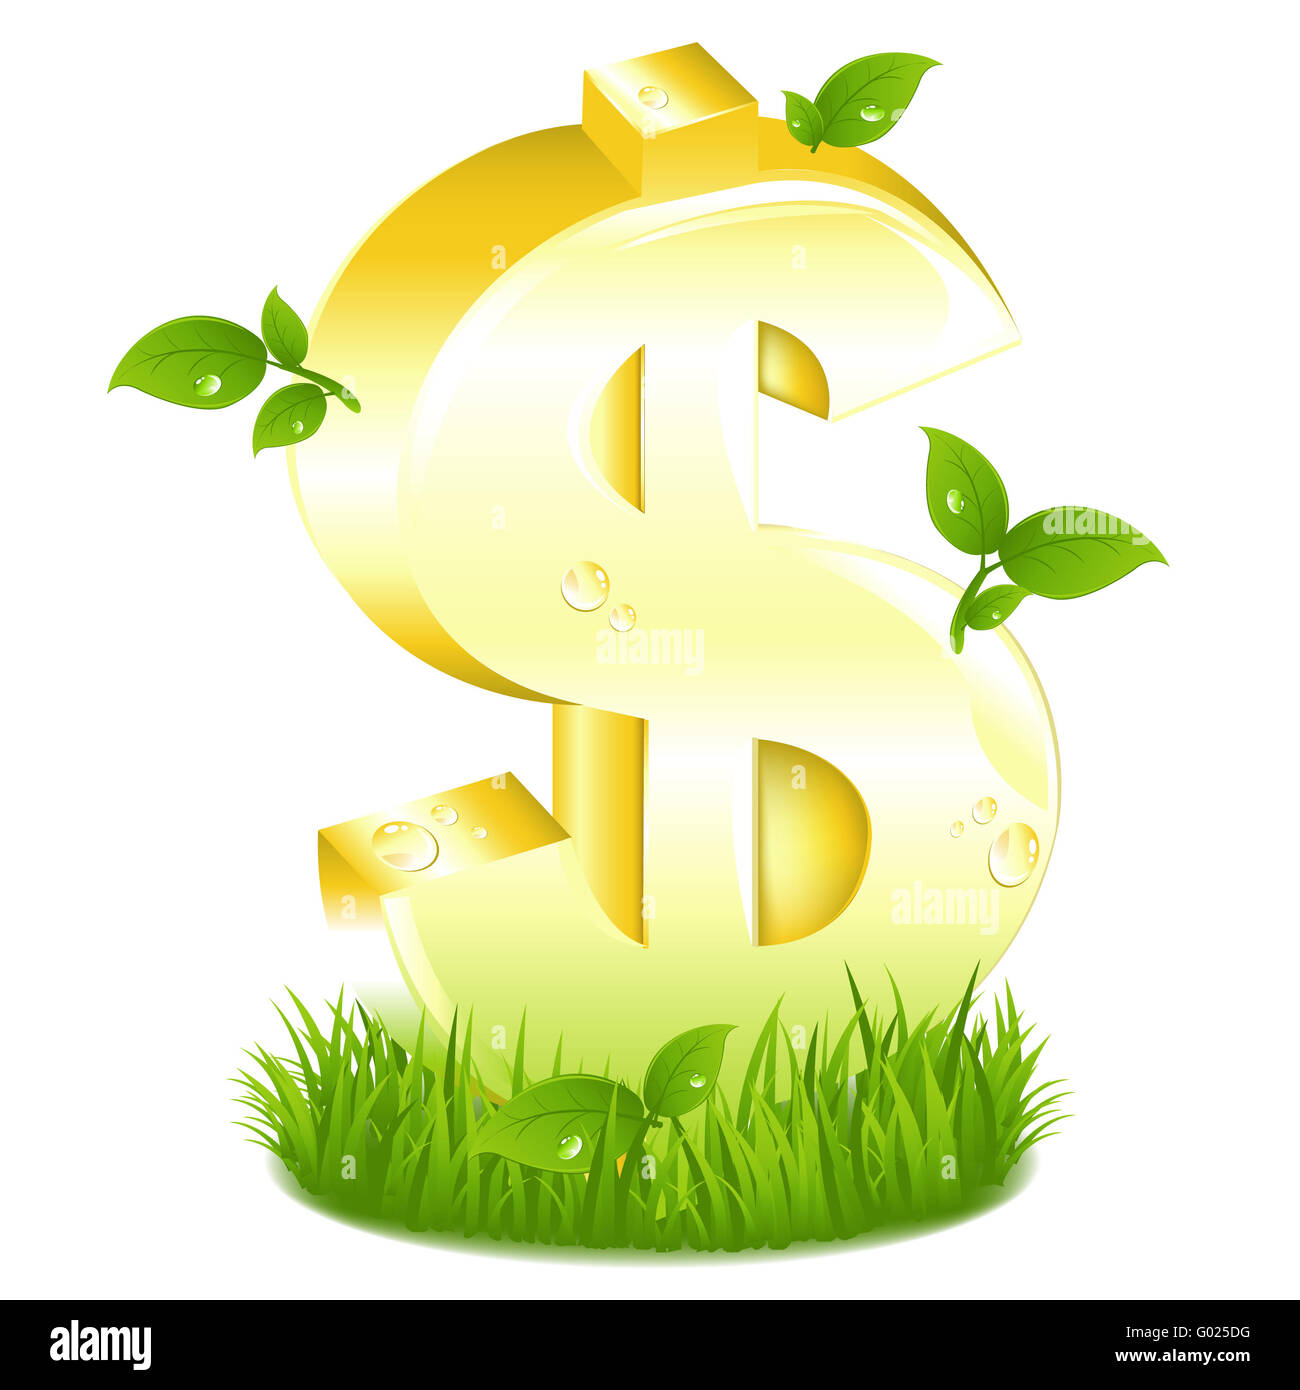 Golden Dollar Sign With Green Leaves In Grass Stock Photo